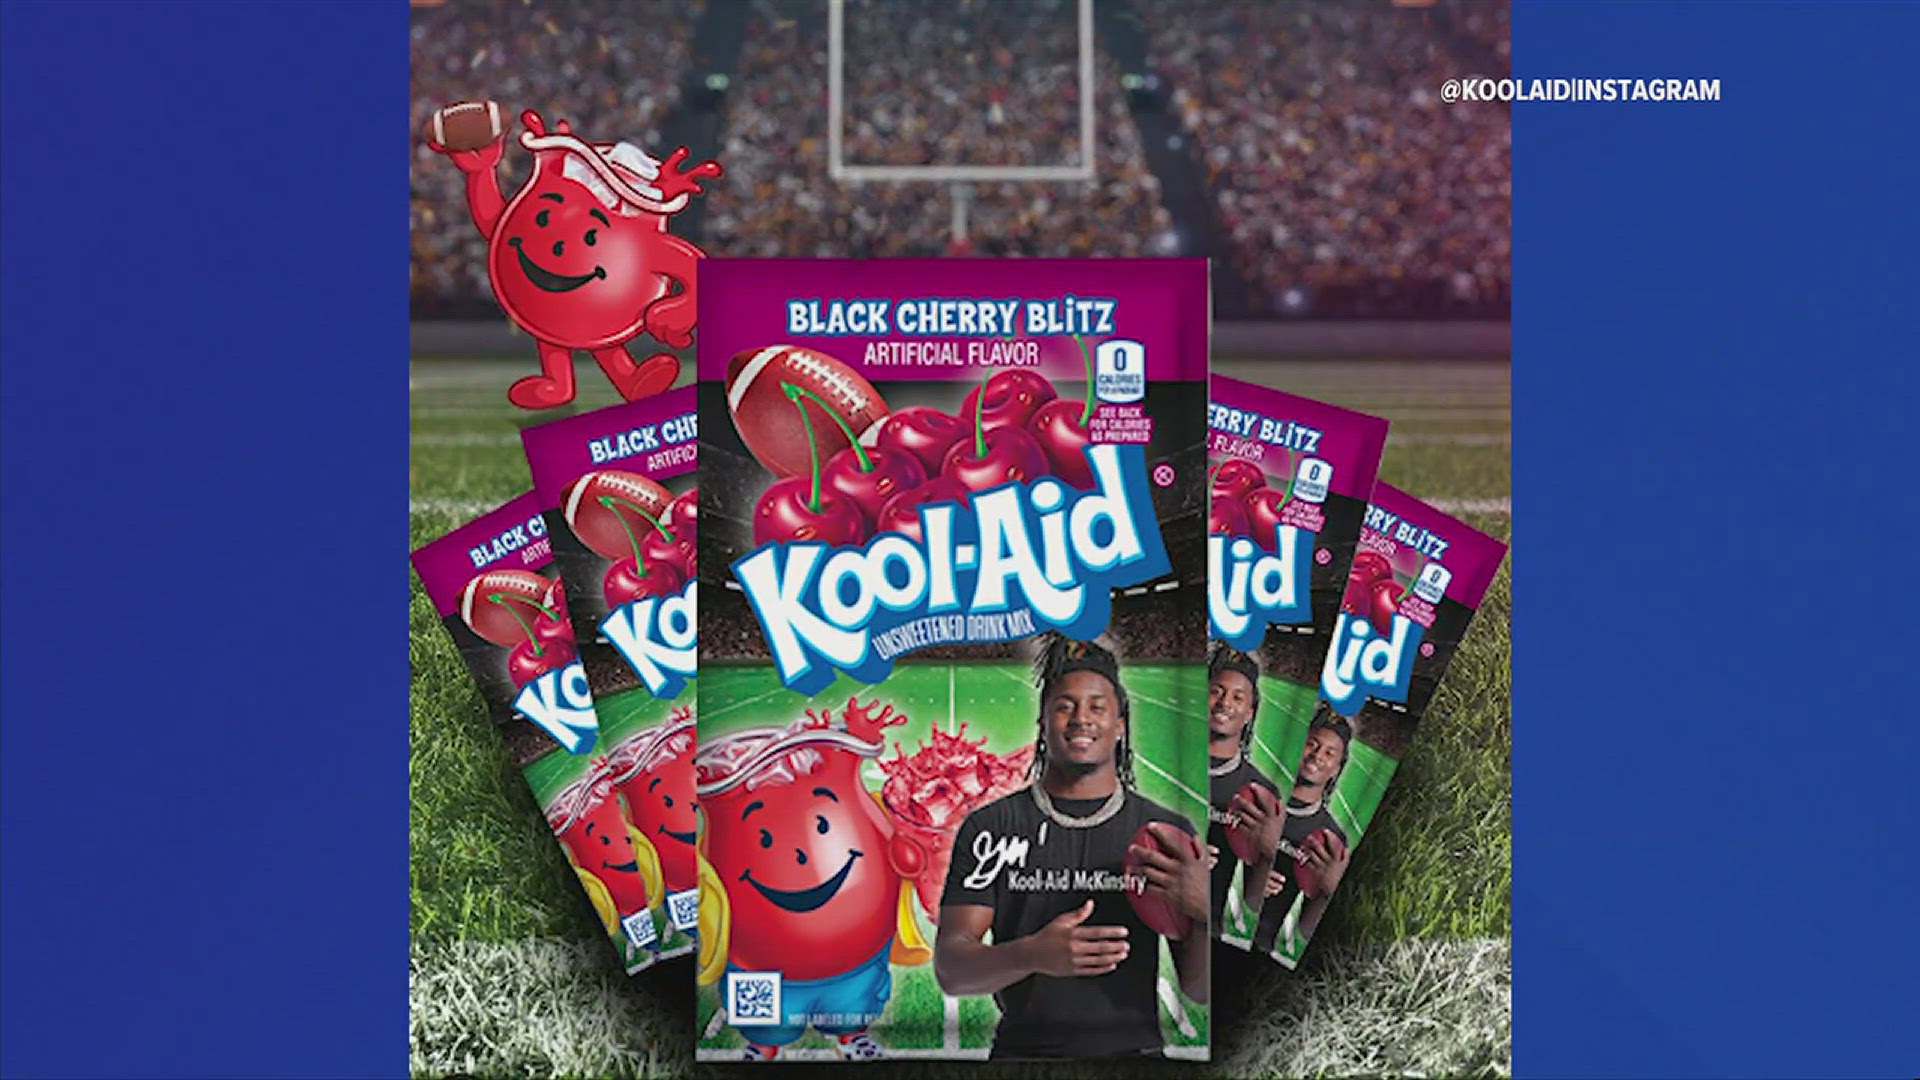 McKinstry is heading to the New Orleans Saints and the makers of Kool-Aid drink mixes are celebrating his draft with a special package.